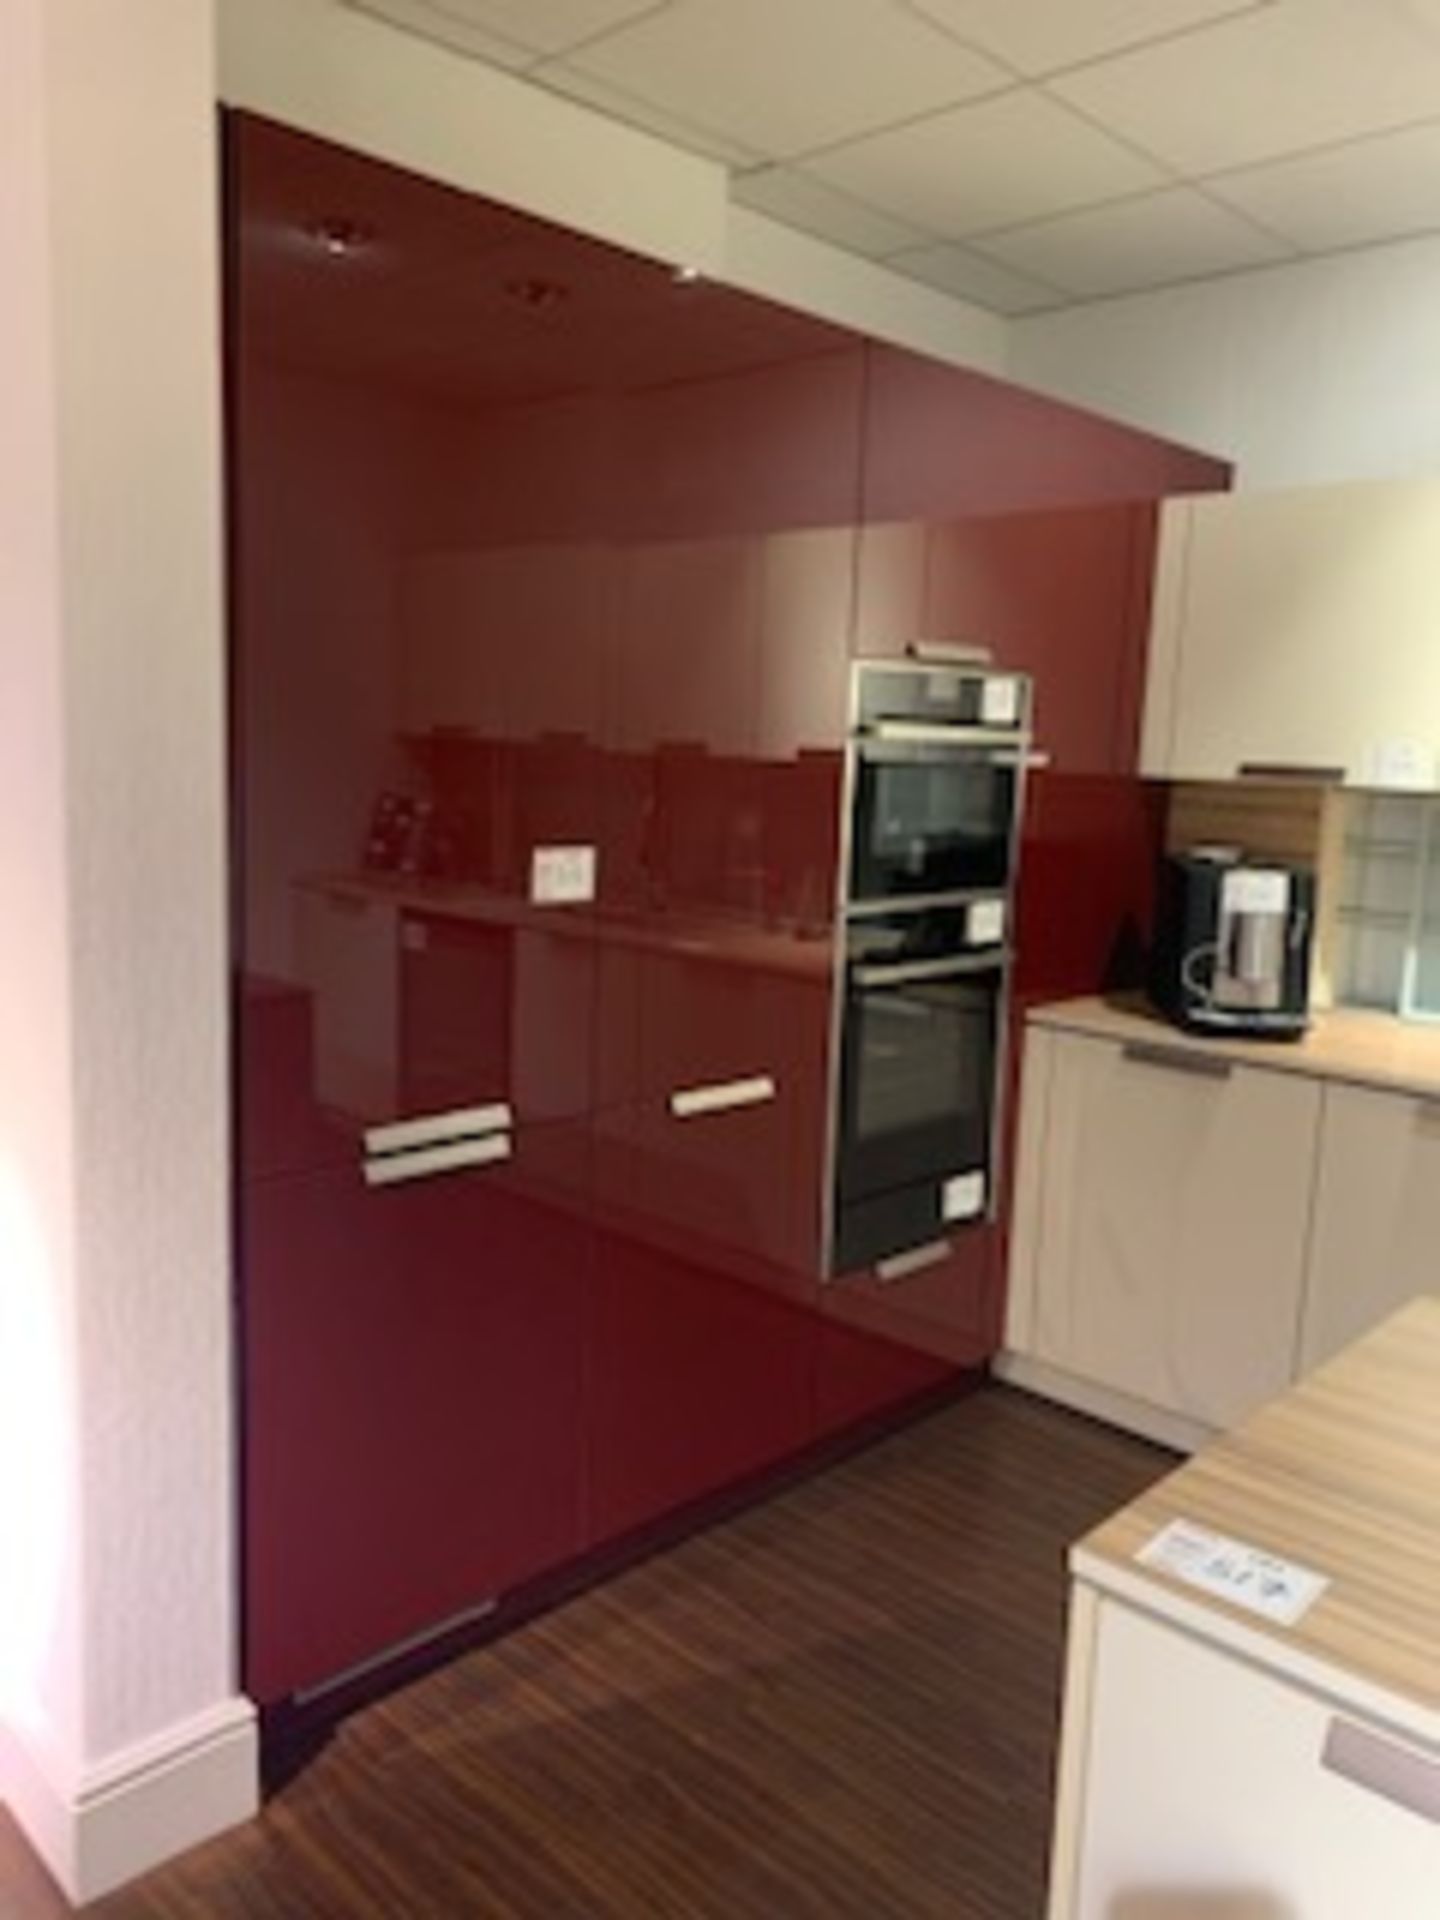 Burgundy Miele DISPLAY 2670l x 2210h x 550d (integrated appliance not included see Lots 550-553)